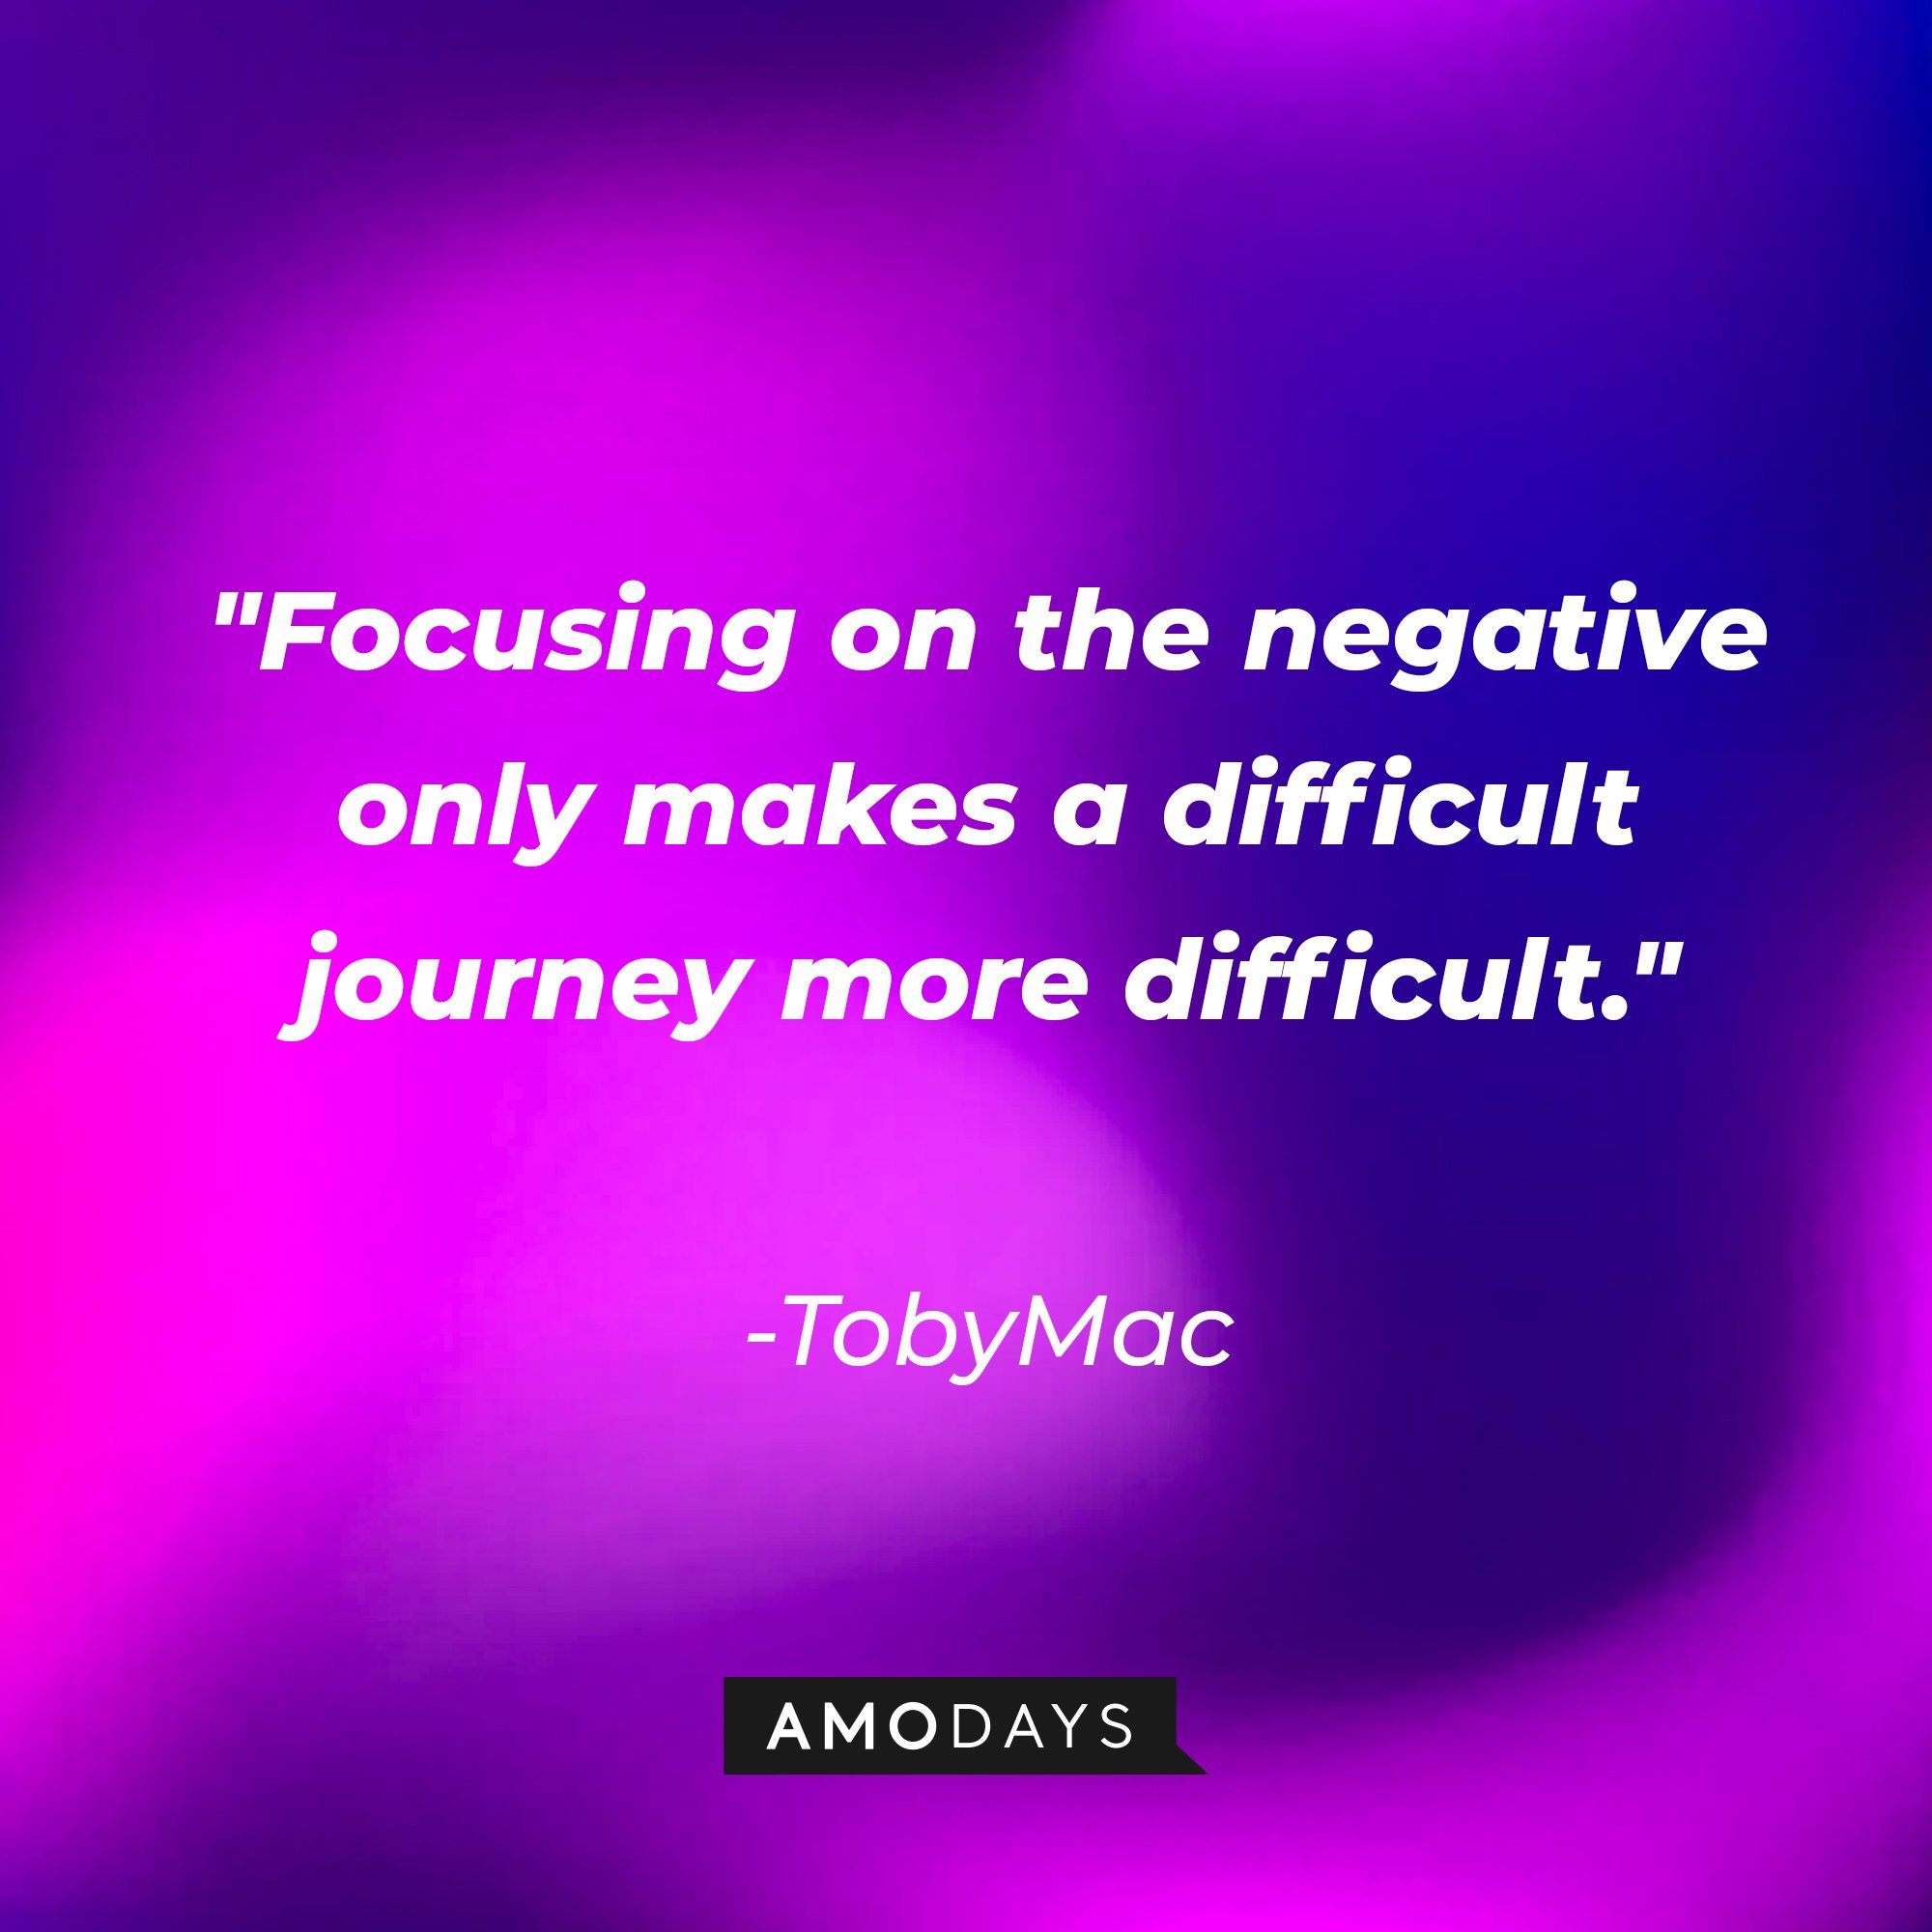 TobyMac's quote: "Focusing on the negative only makes a difficult journey more difficult." | Image: AmoDays